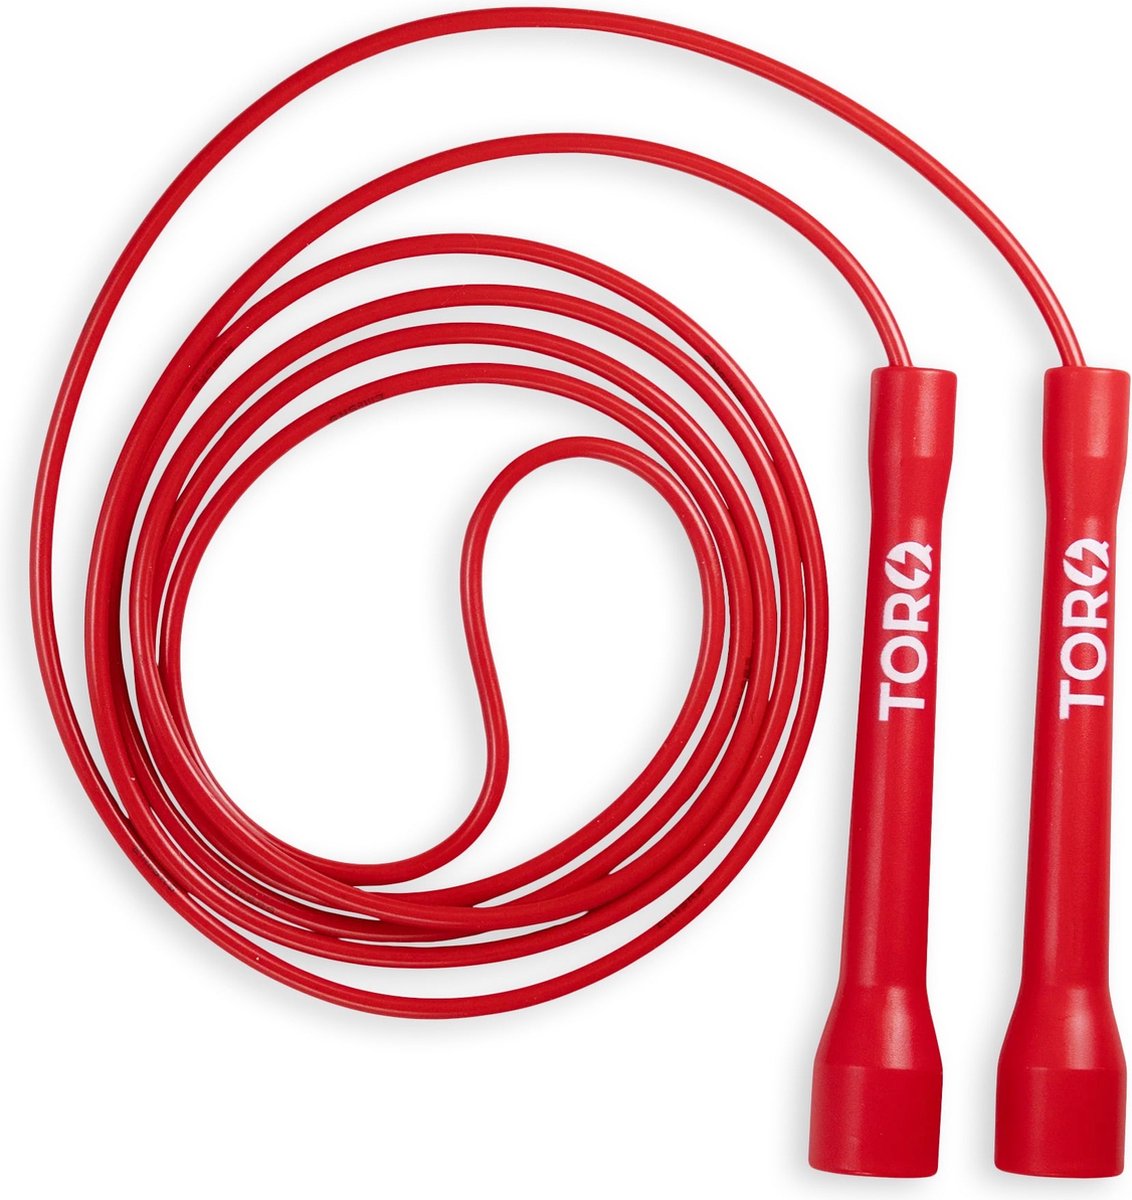 TORQ Jump rope Current - springtouw (red) 10ft (305cm) - ⌀5mm - 100gr - middlehandle